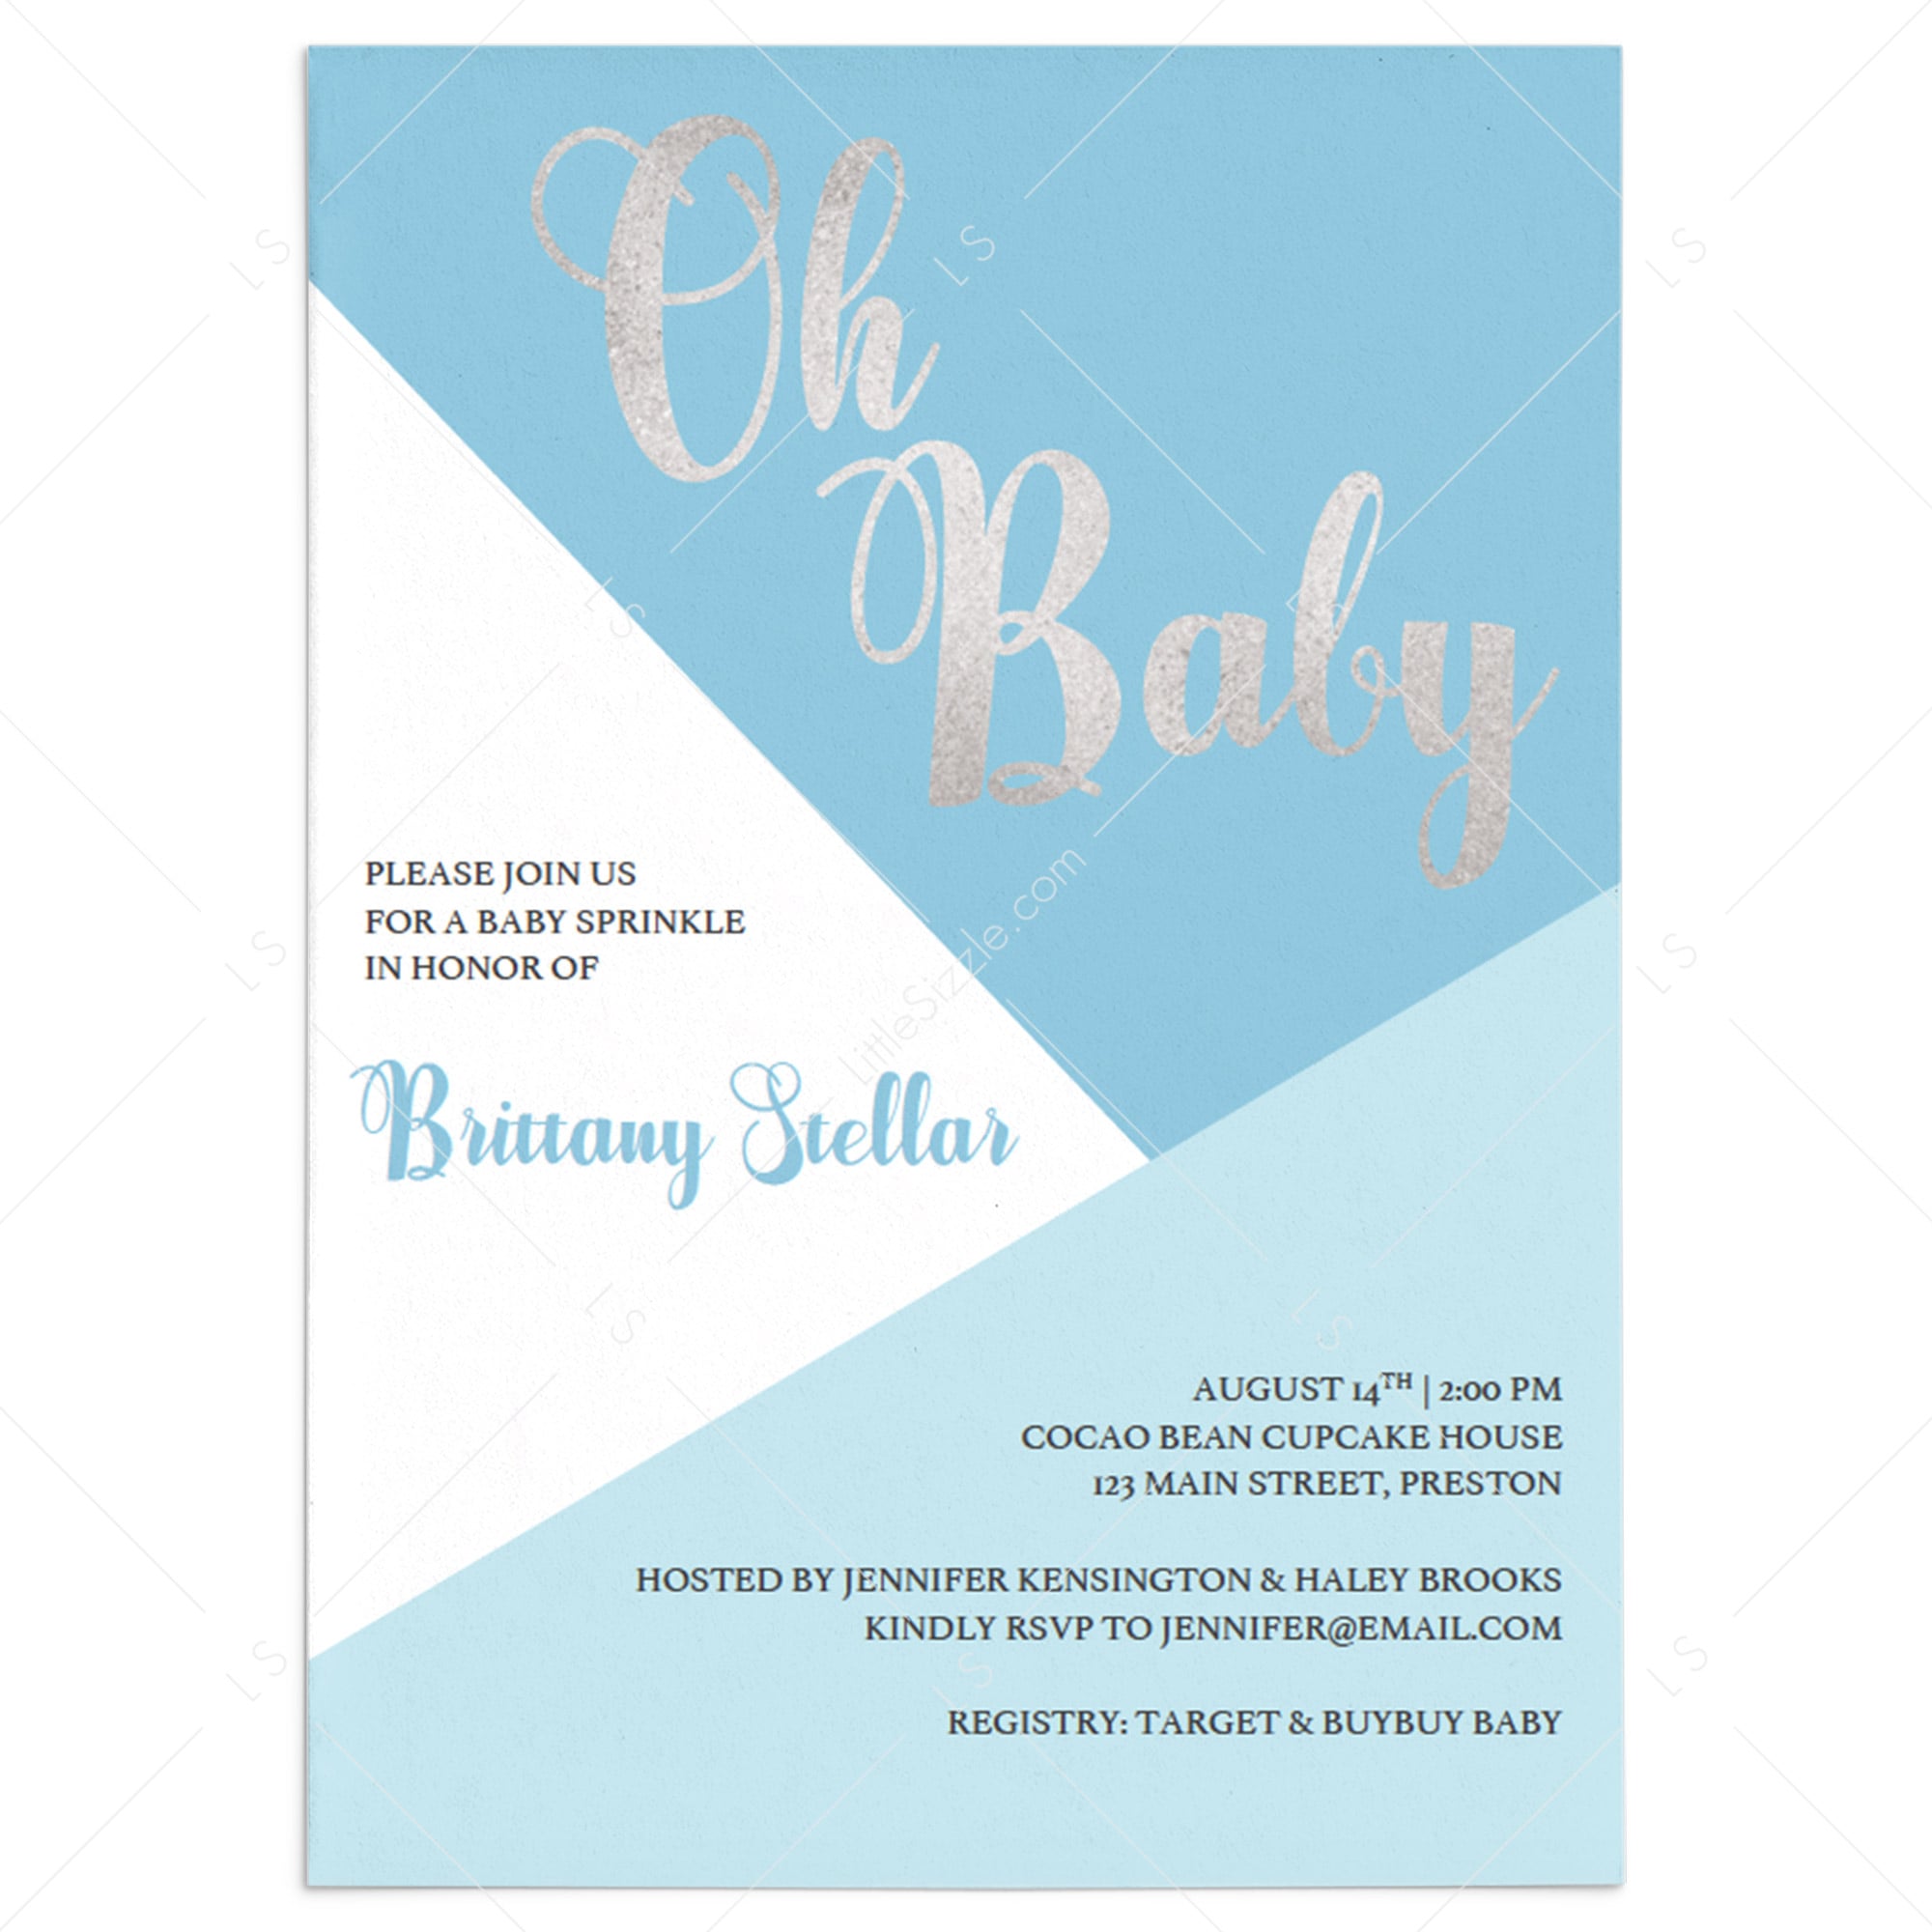 Boy Baby Sprinkle Invitation Template Instant Download by LittleSizzle